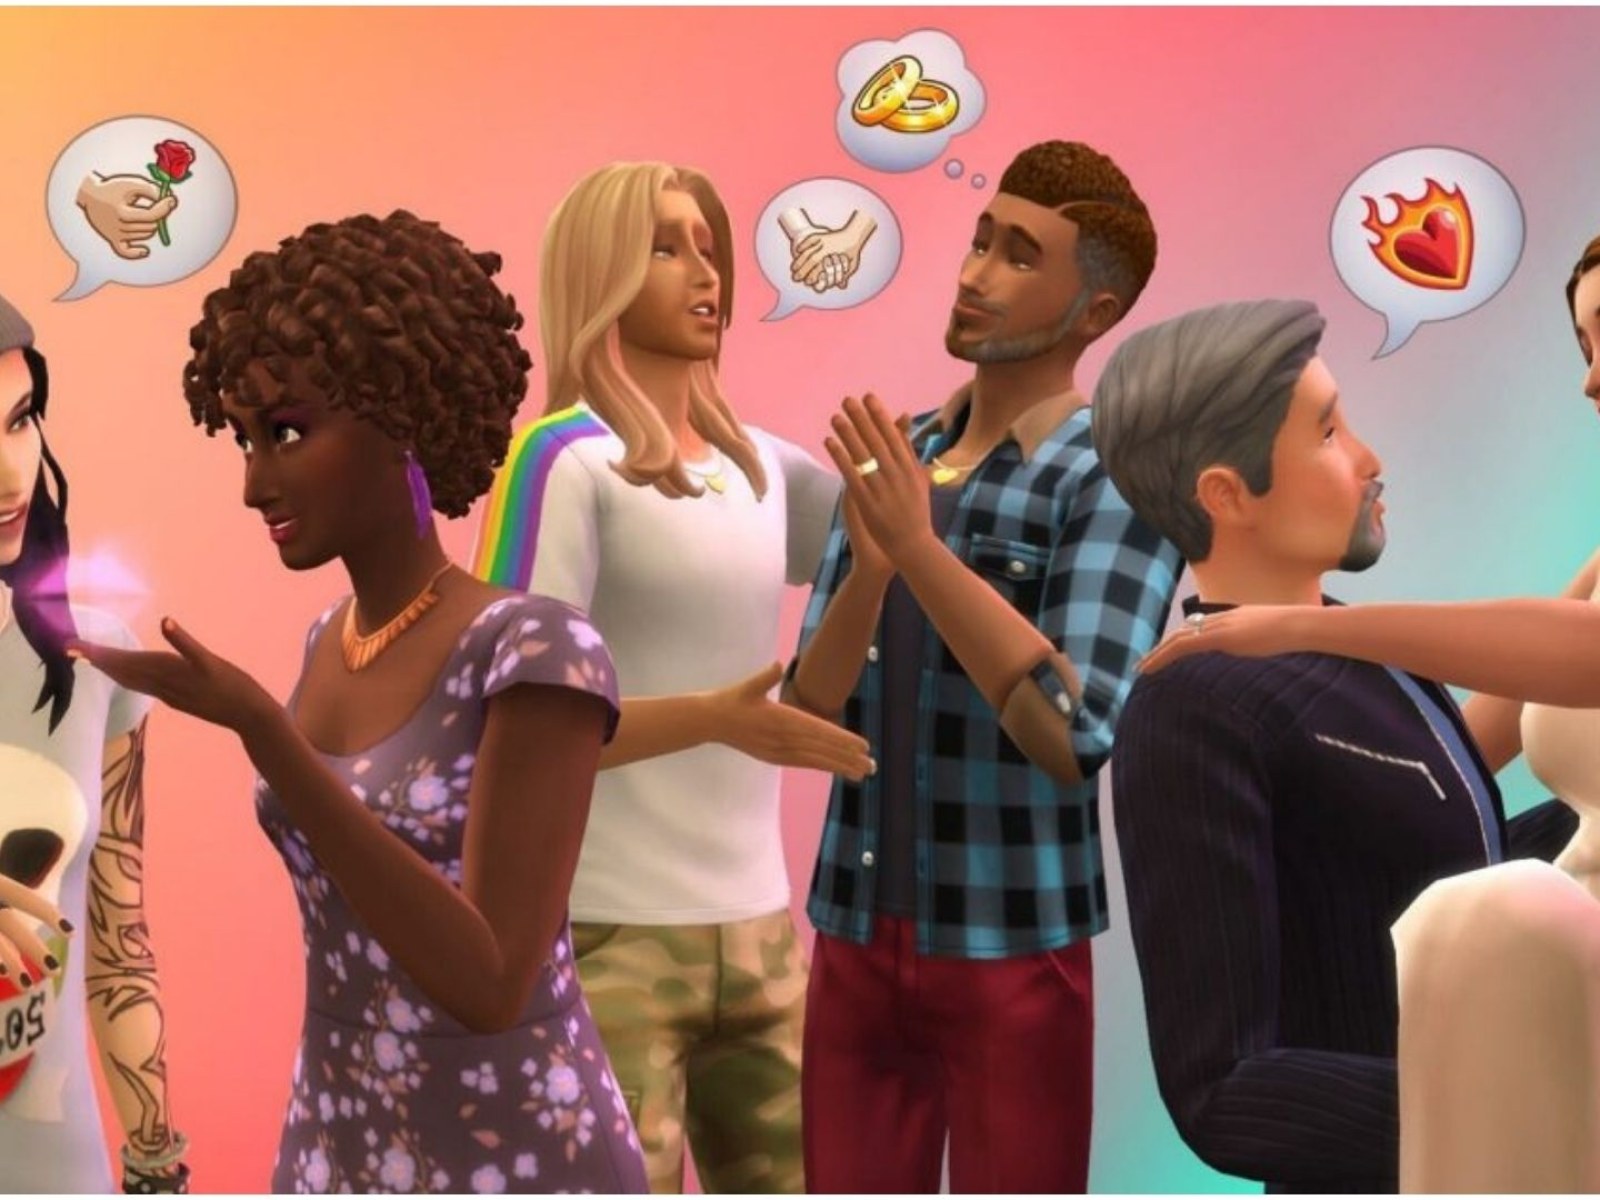 How to Use The Sims 4 Relationship Cheats